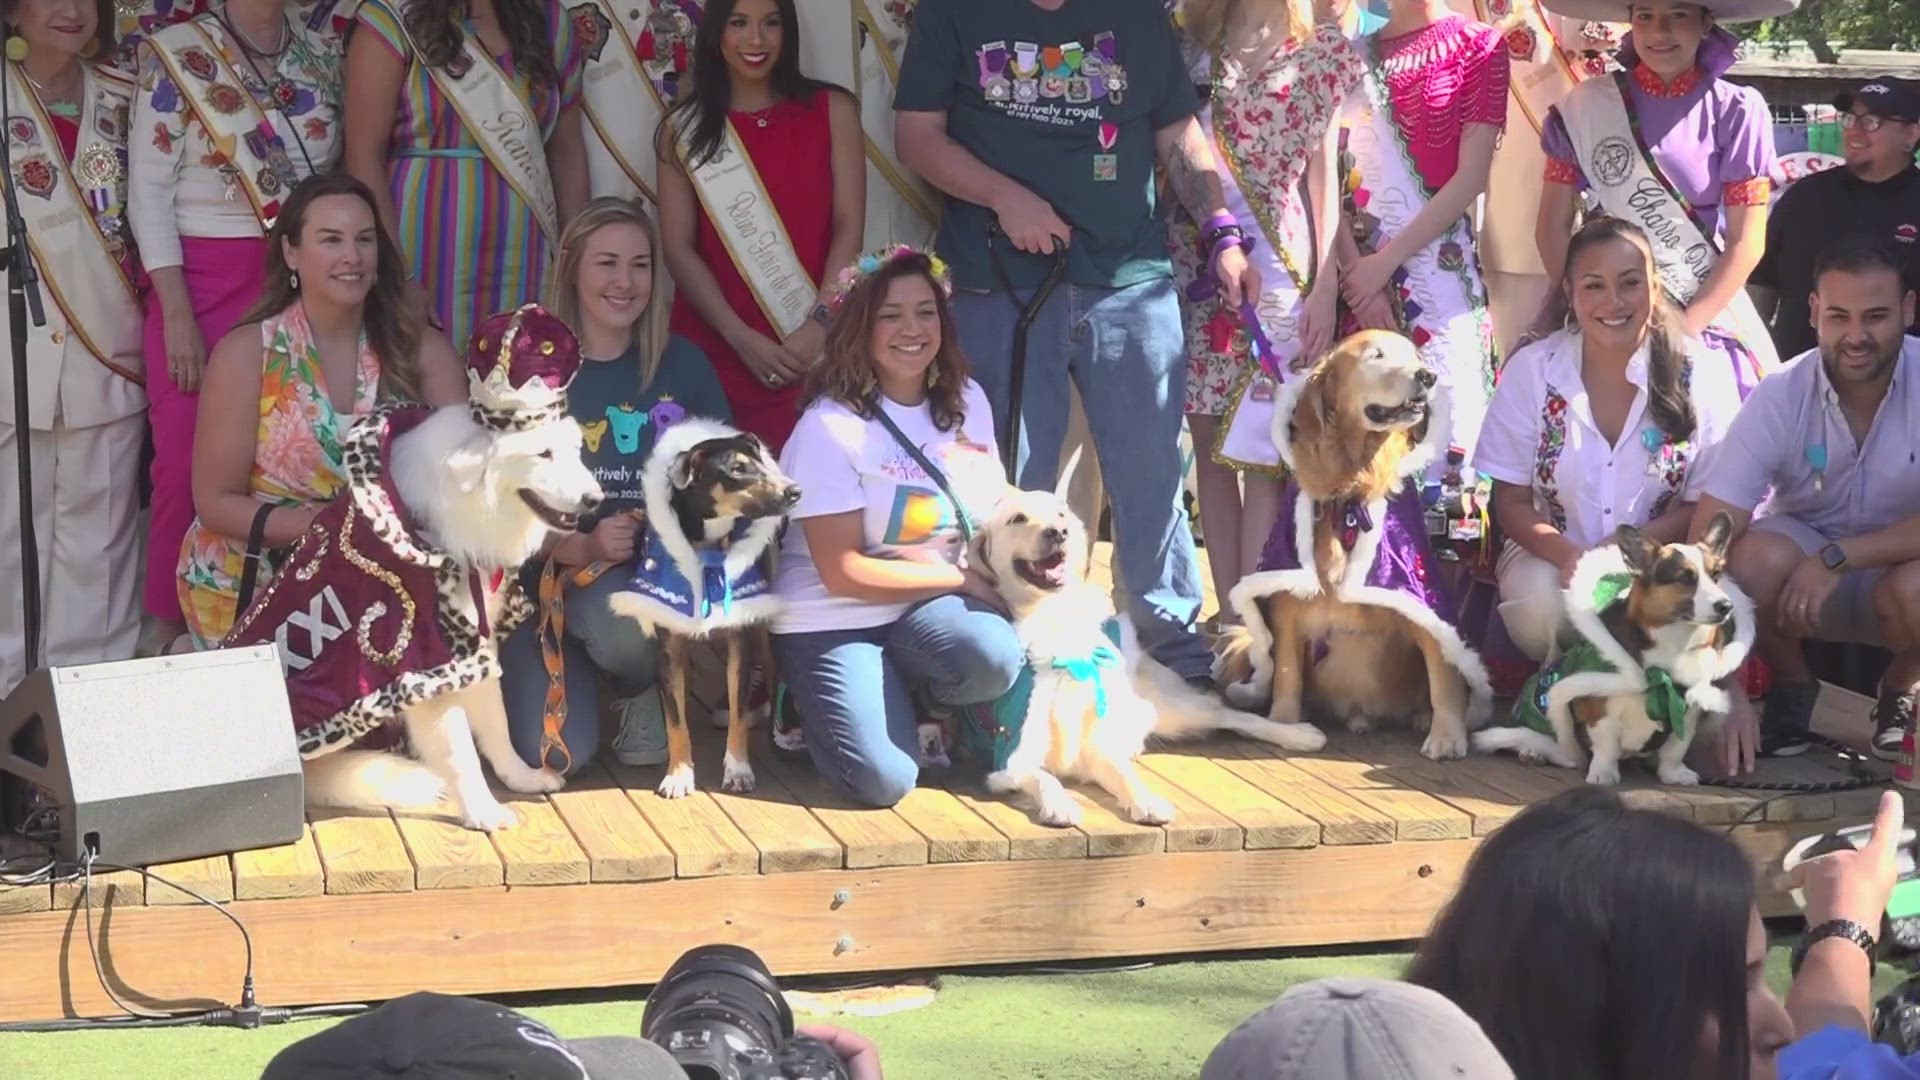 The annual Fiesta event at Hops and Hounds raised tens of thousands of dollars to help the San Antonio Humane Society.